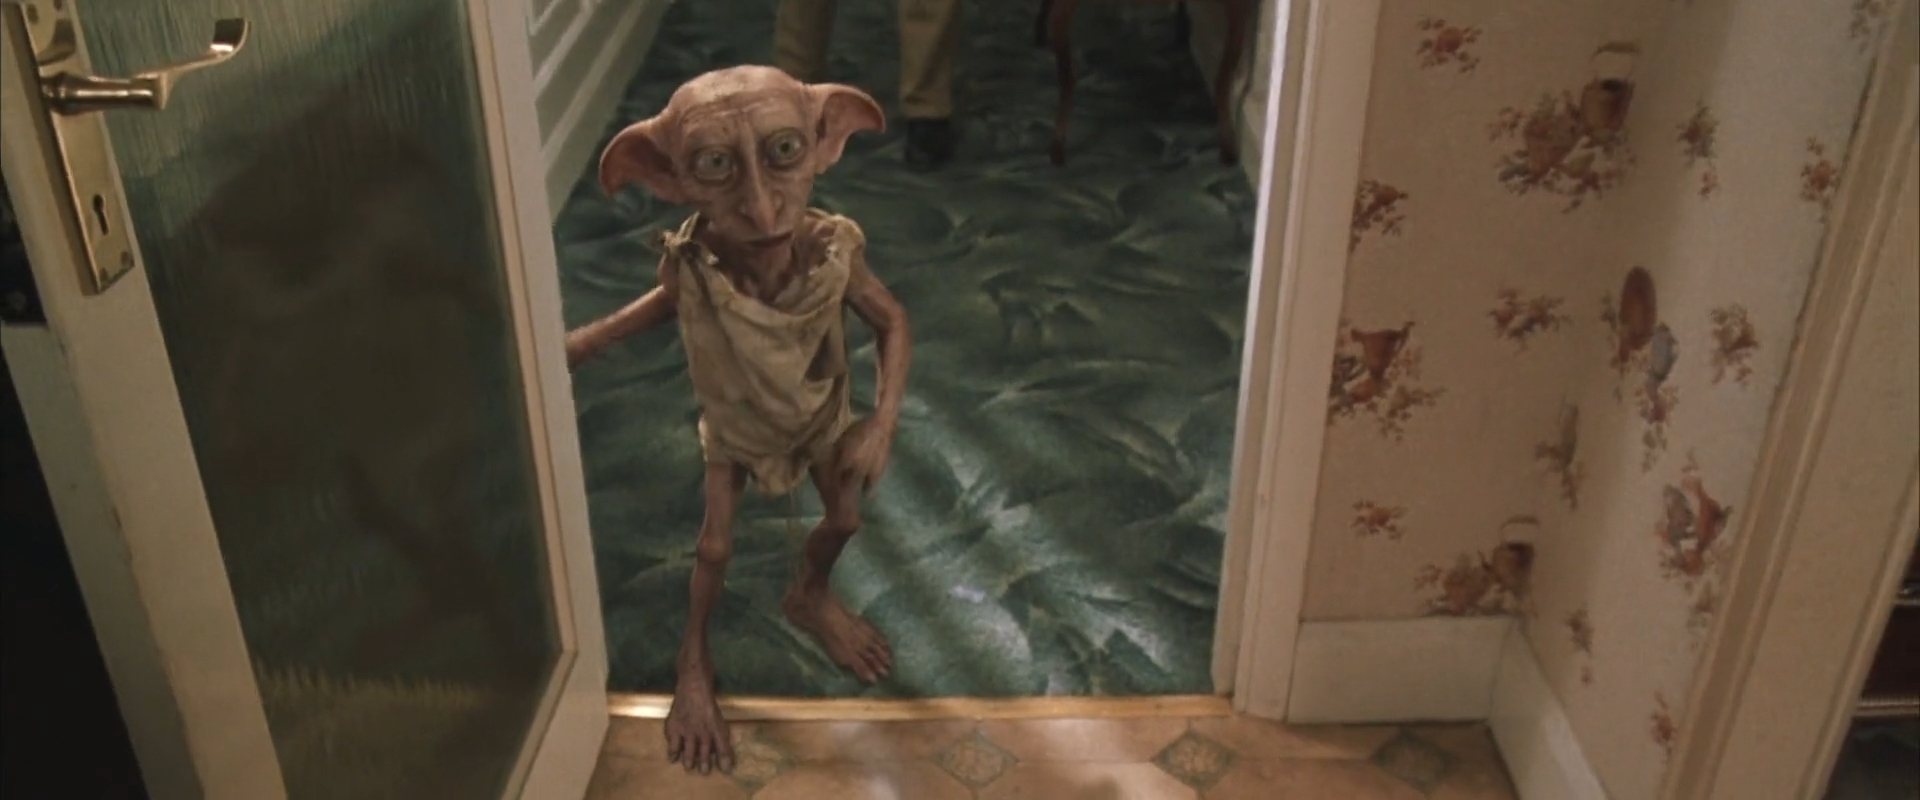 Why Dobby Helped Harry Potter in Chamber of Secrets